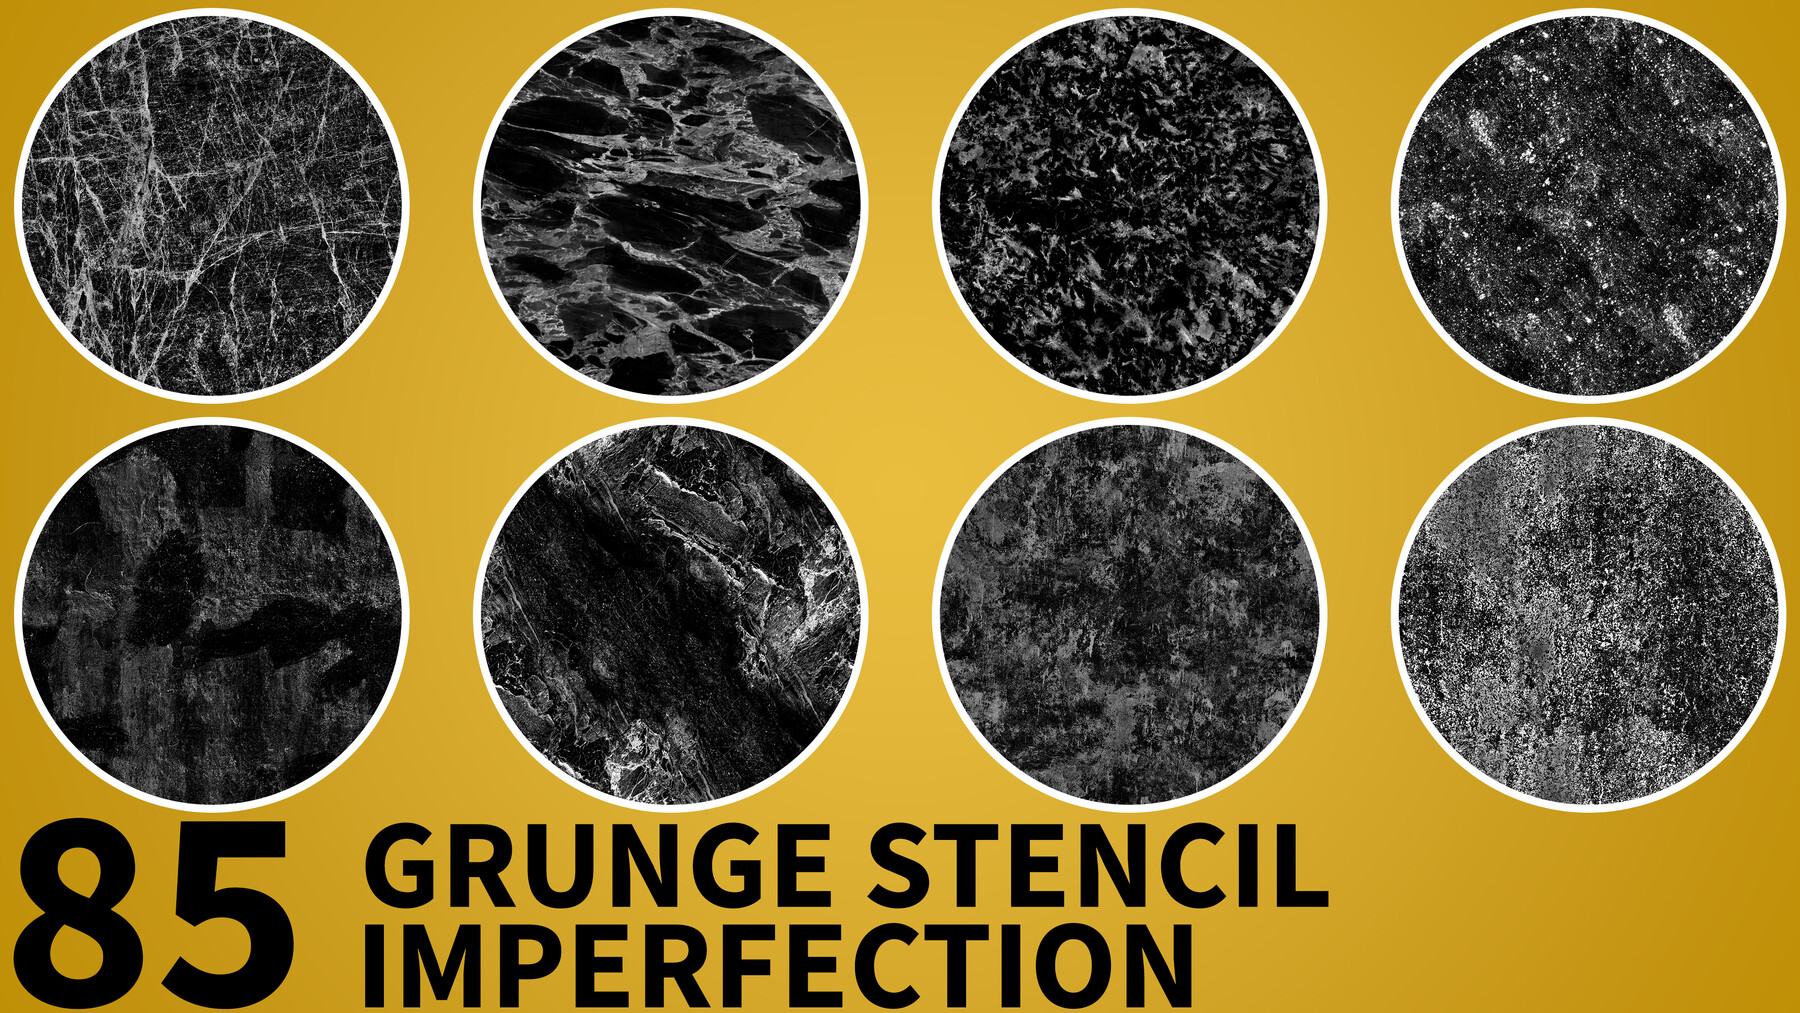 High Quality Useful Grunge Stencil Imperfection vol.2